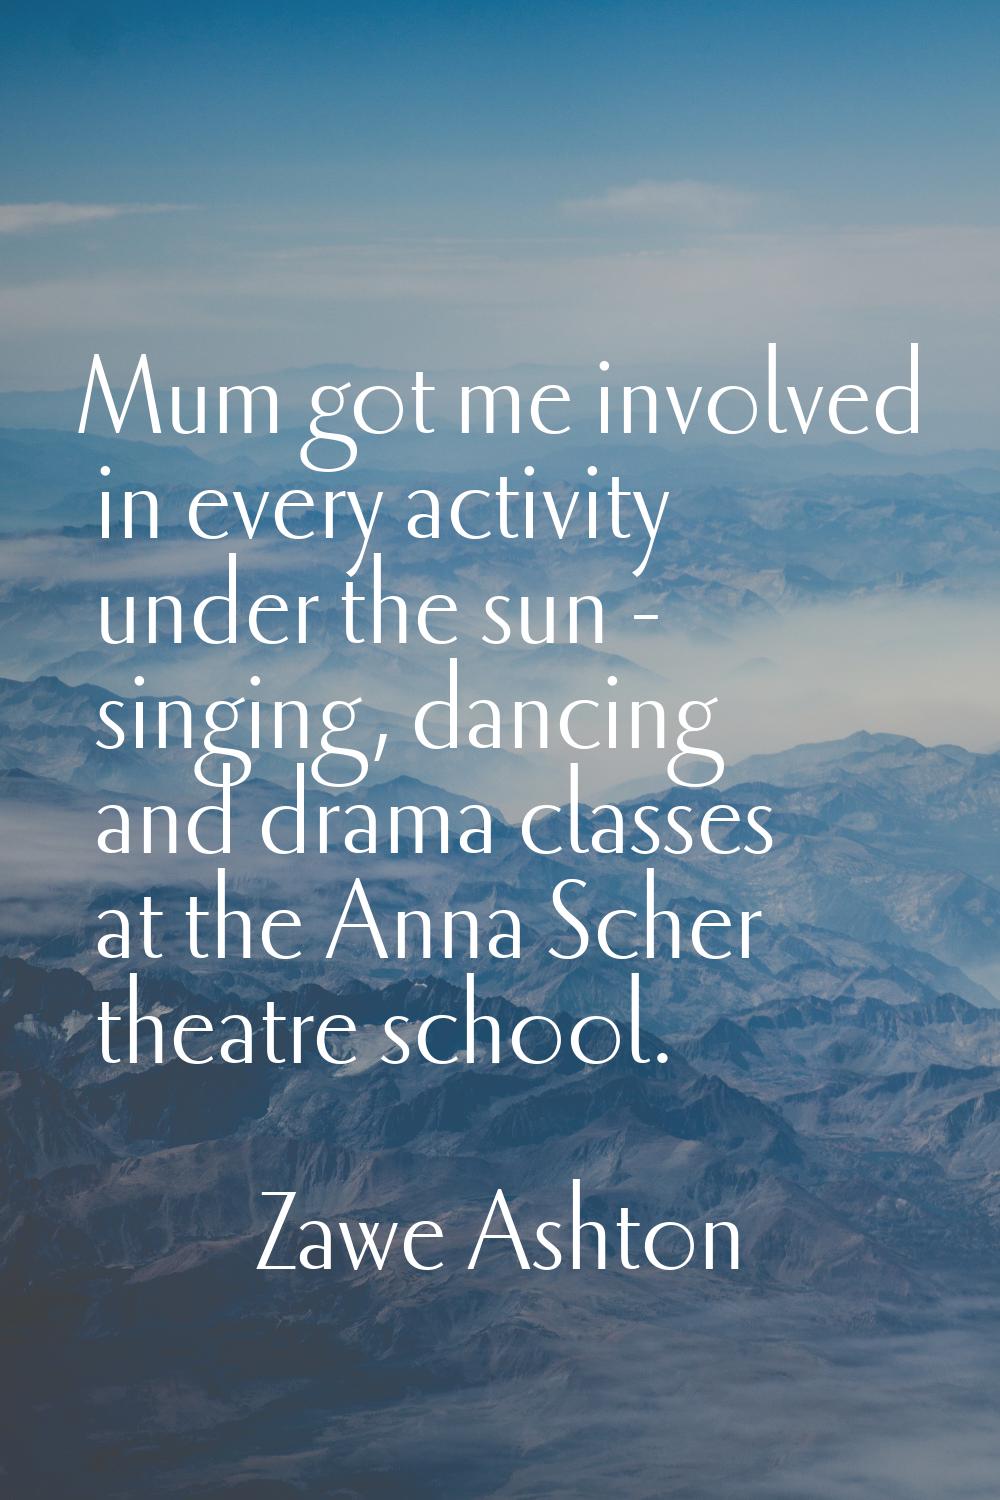 Mum got me involved in every activity under the sun - singing, dancing and drama classes at the Ann